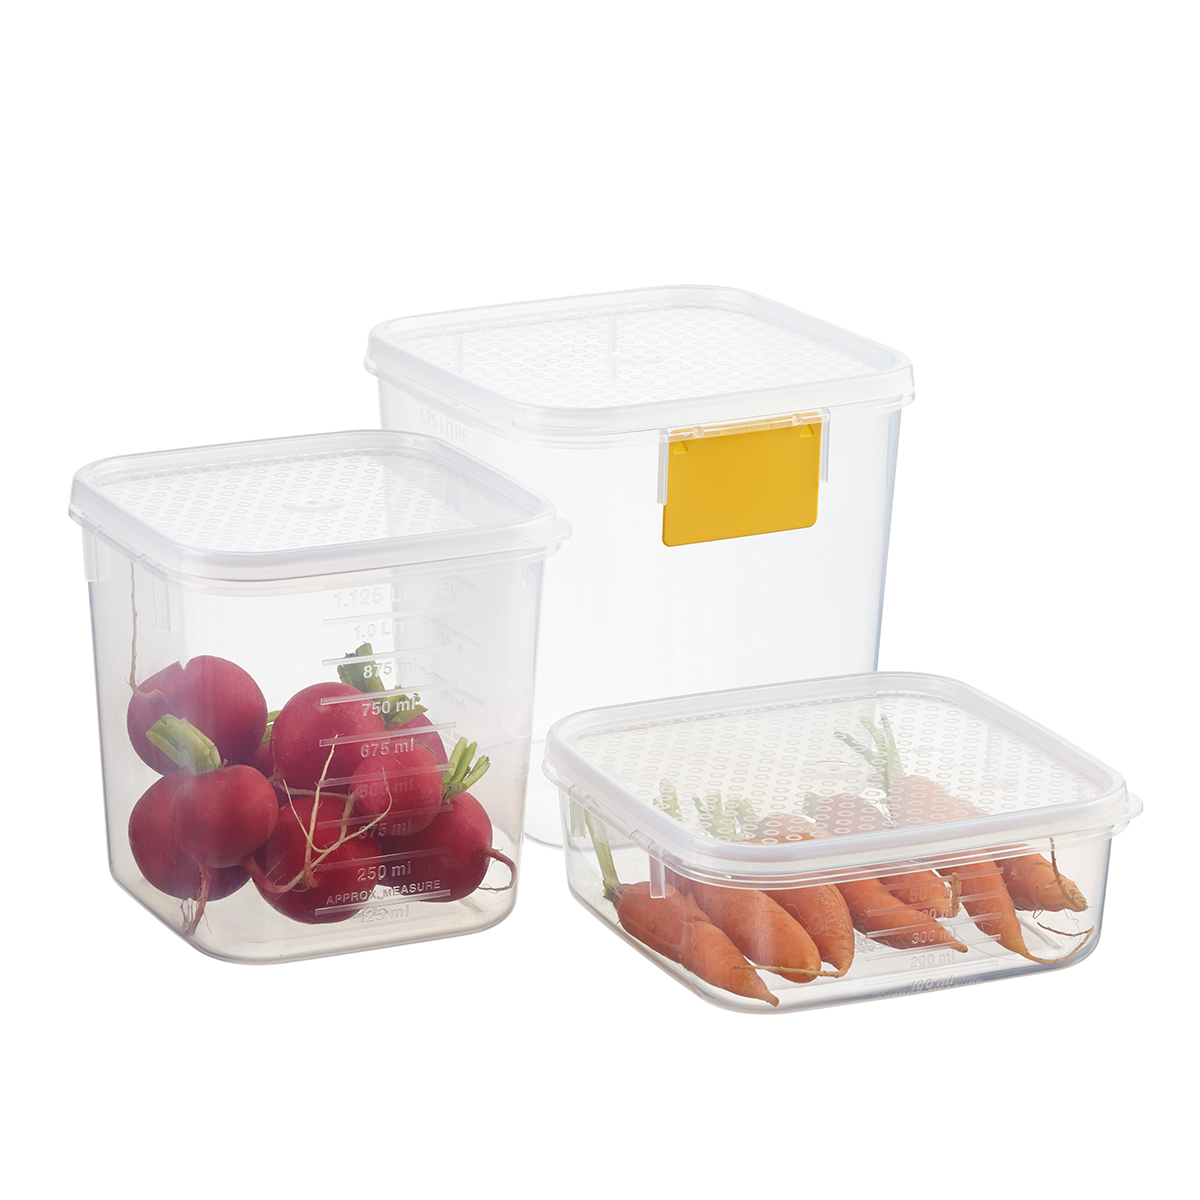 Tellfresh Square Food Storage | The Container Store